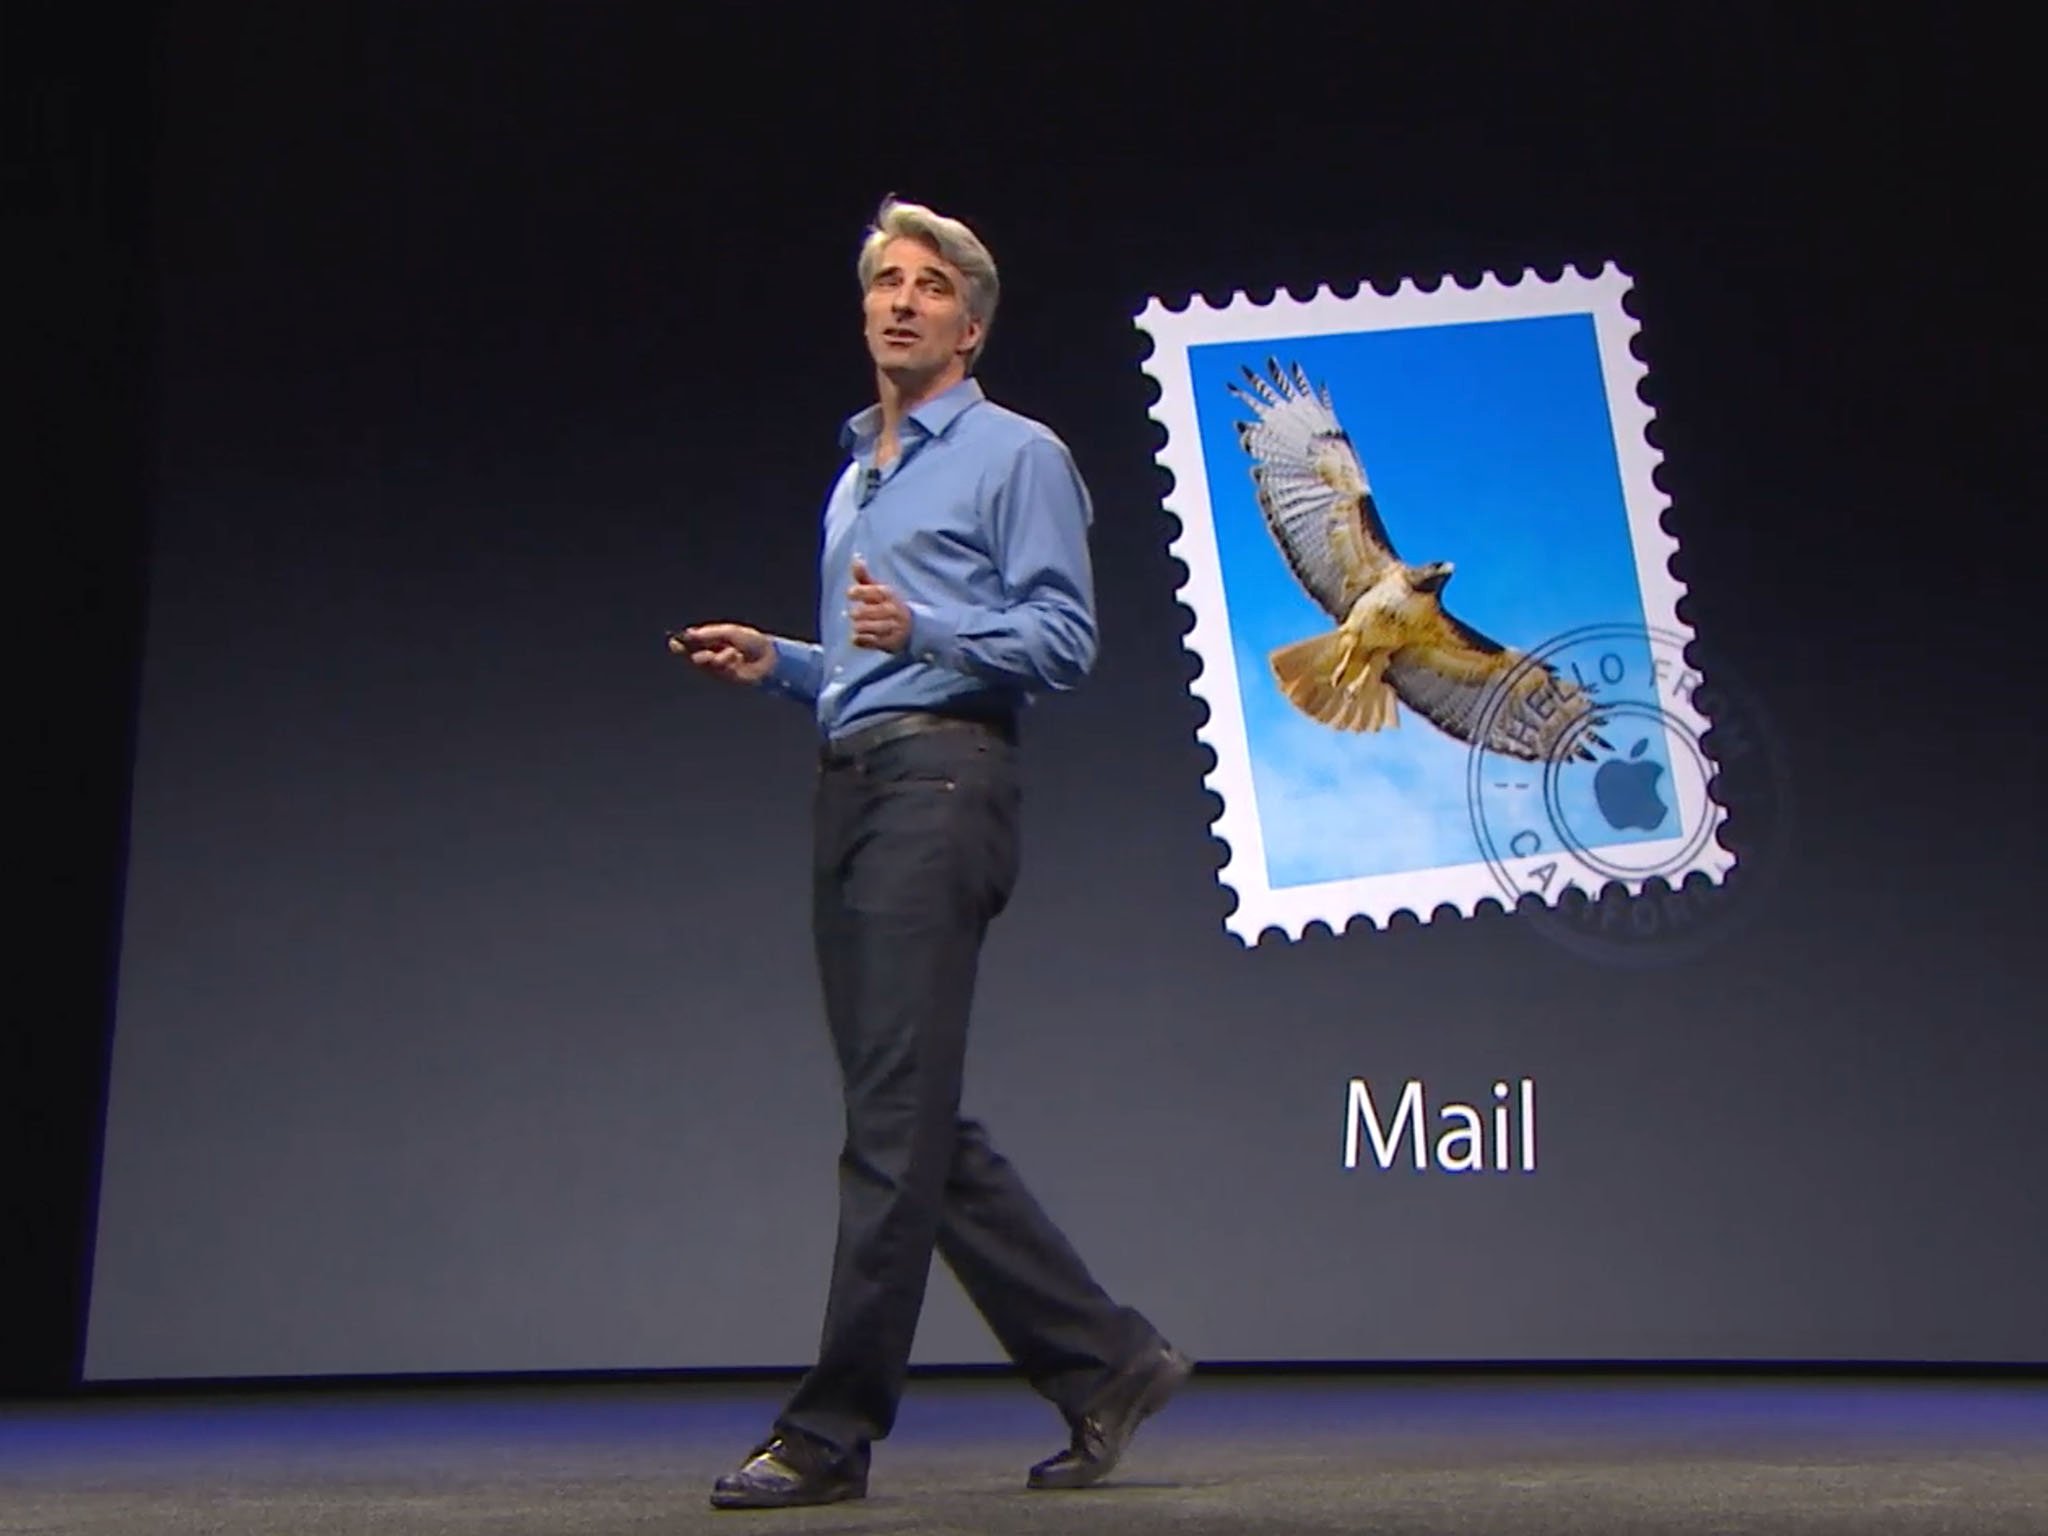 Mail in OS X Yosemite: Explained